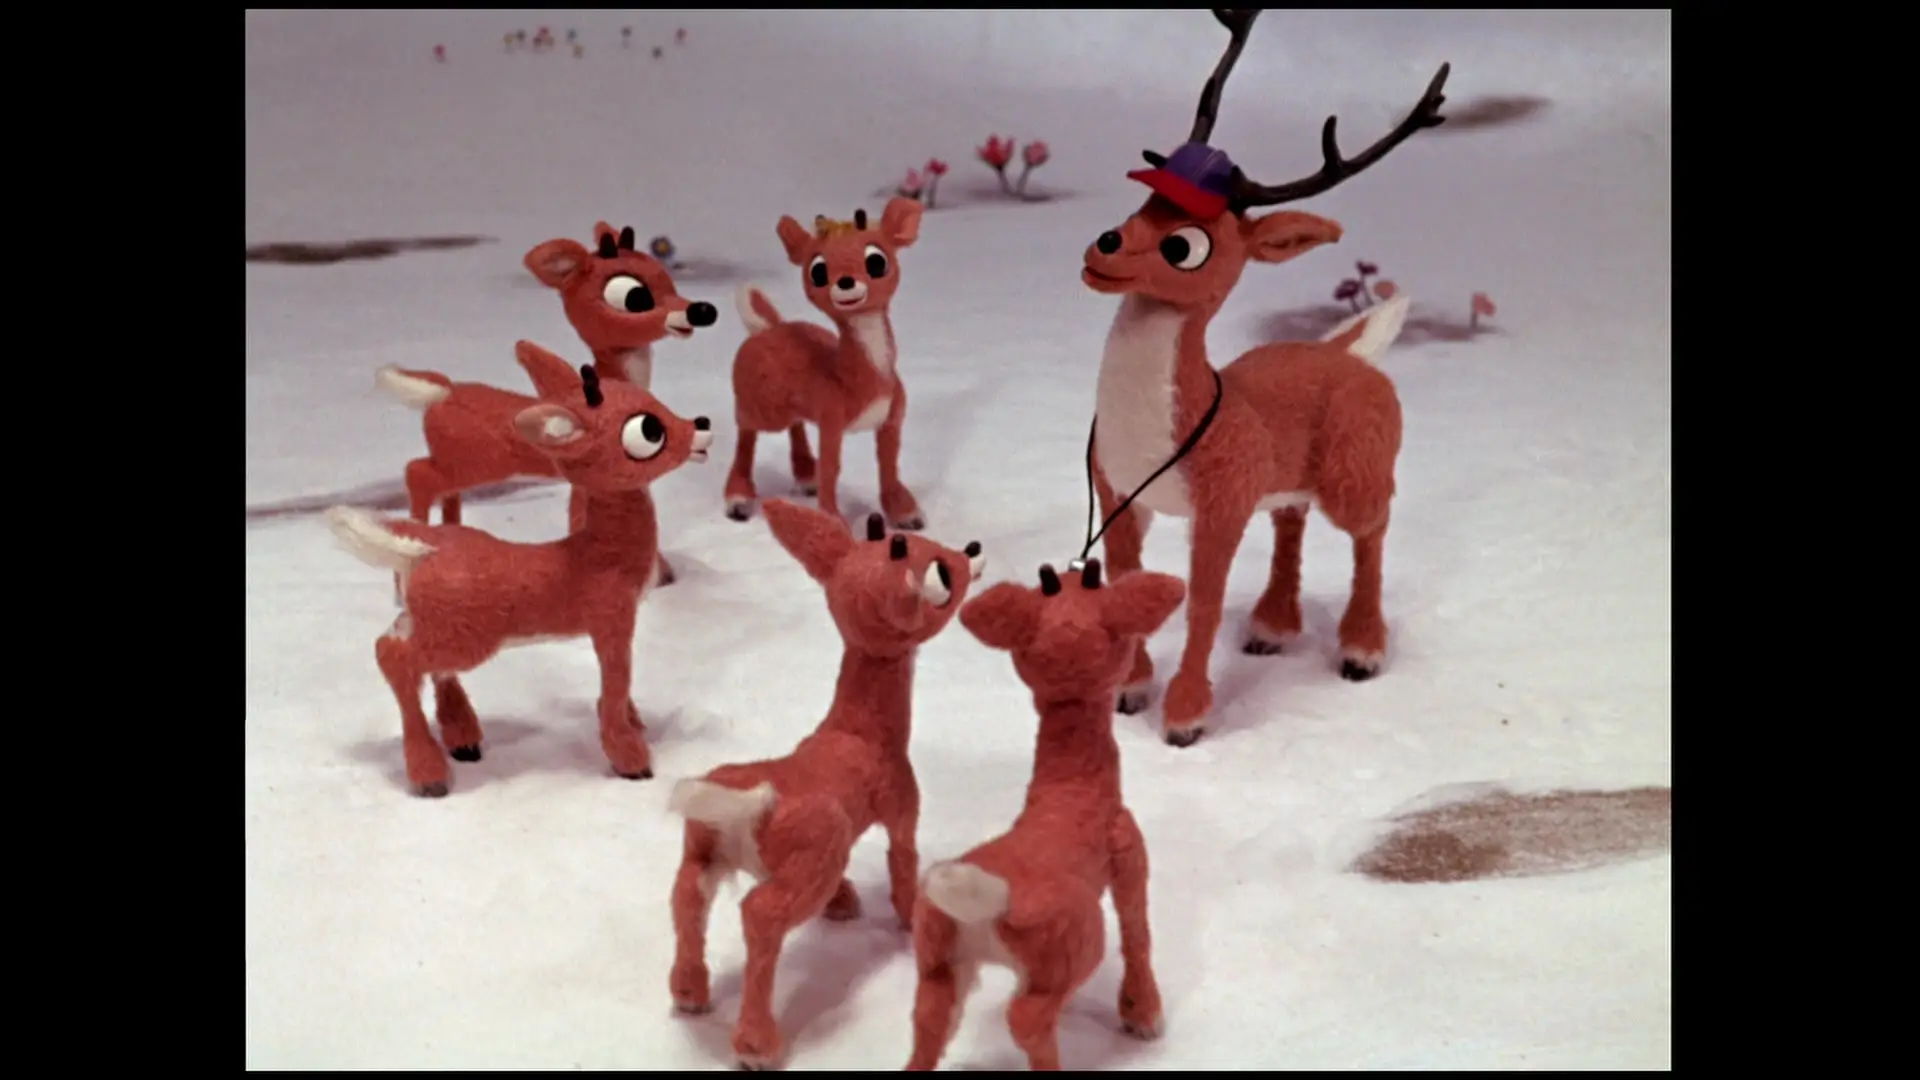 1964 Rudolph The Red-Nosed Reindeer